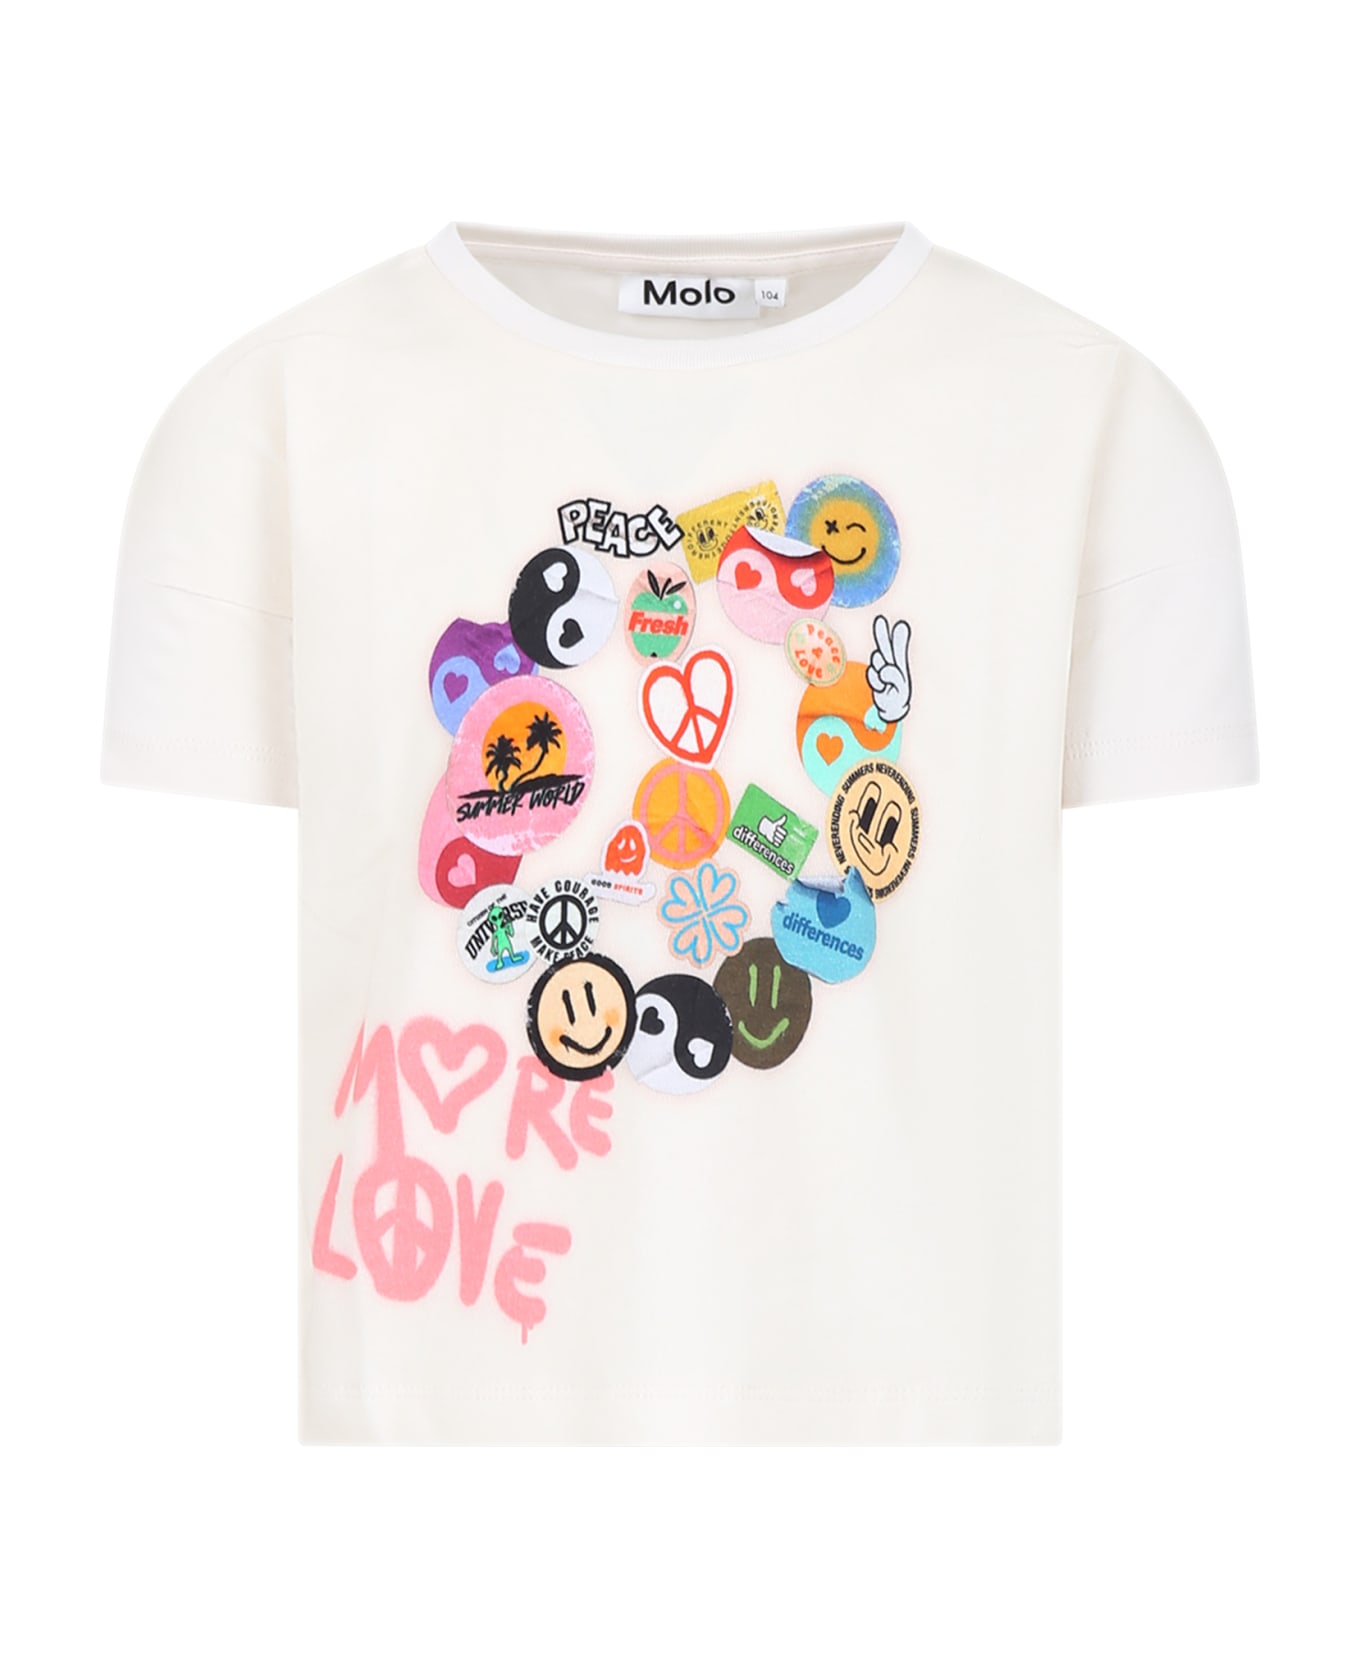 Molo Ivory T-shirt For Girl With Smiley - White